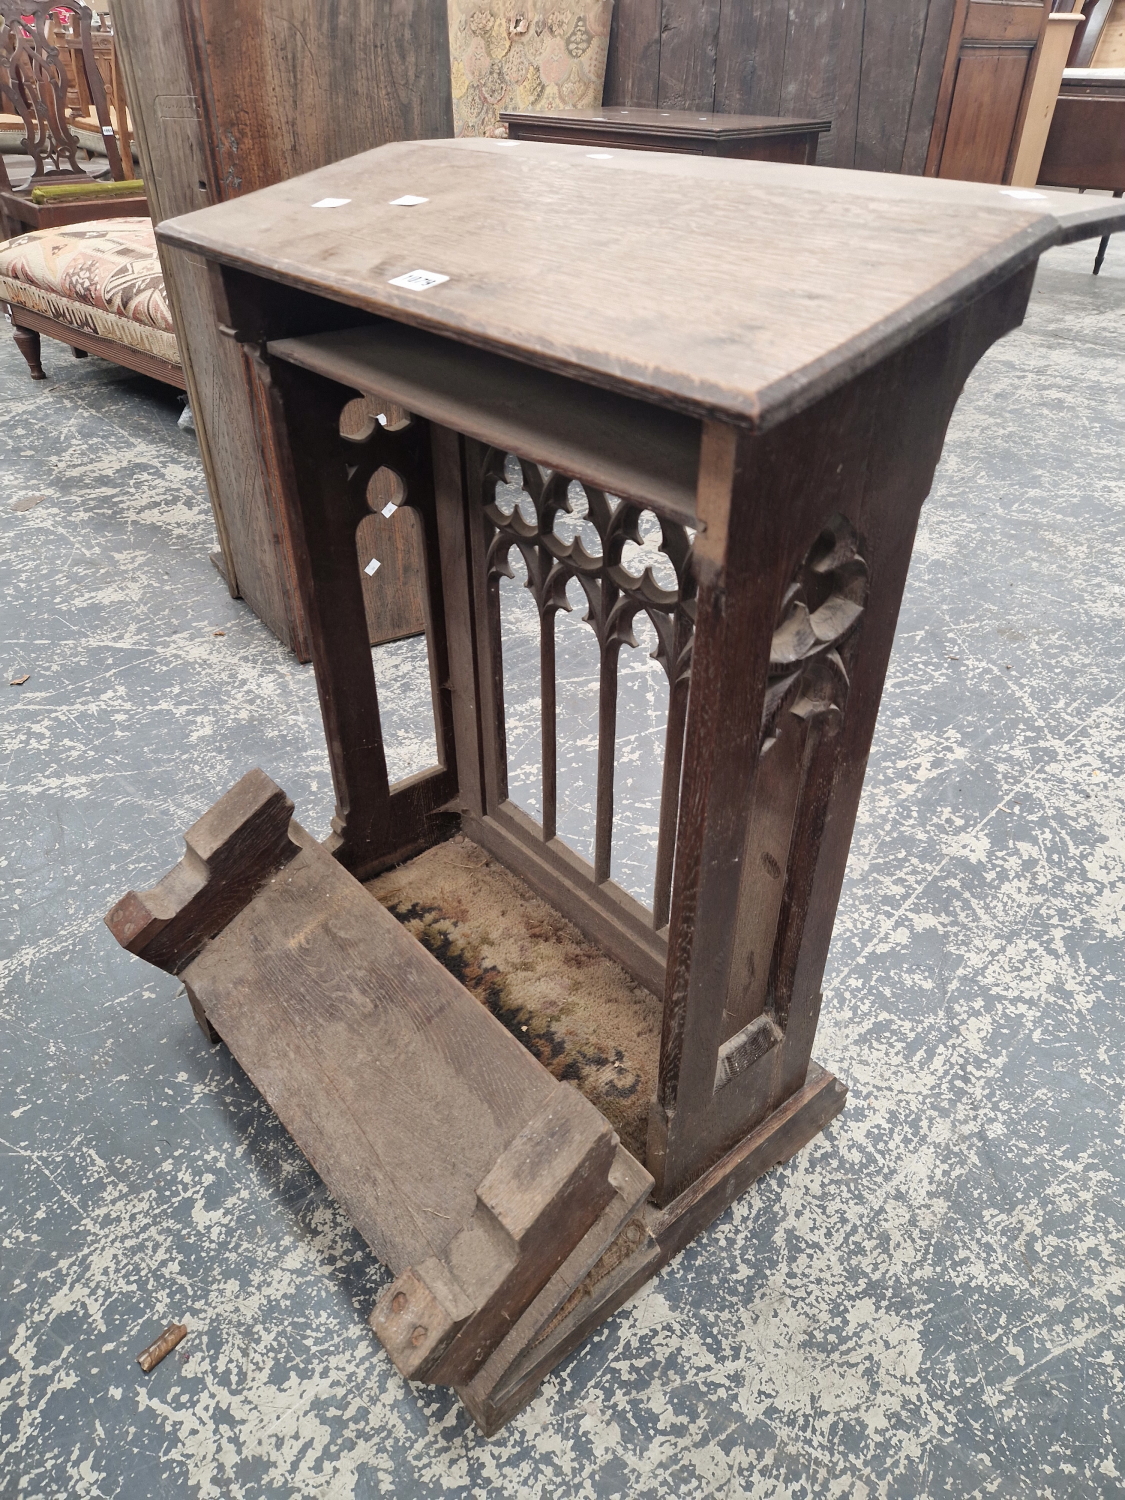 A VICTORIAN GOTHIC REVIVAL PRAYER STAND WITH PIERCED ARCH PANEL FRONT.